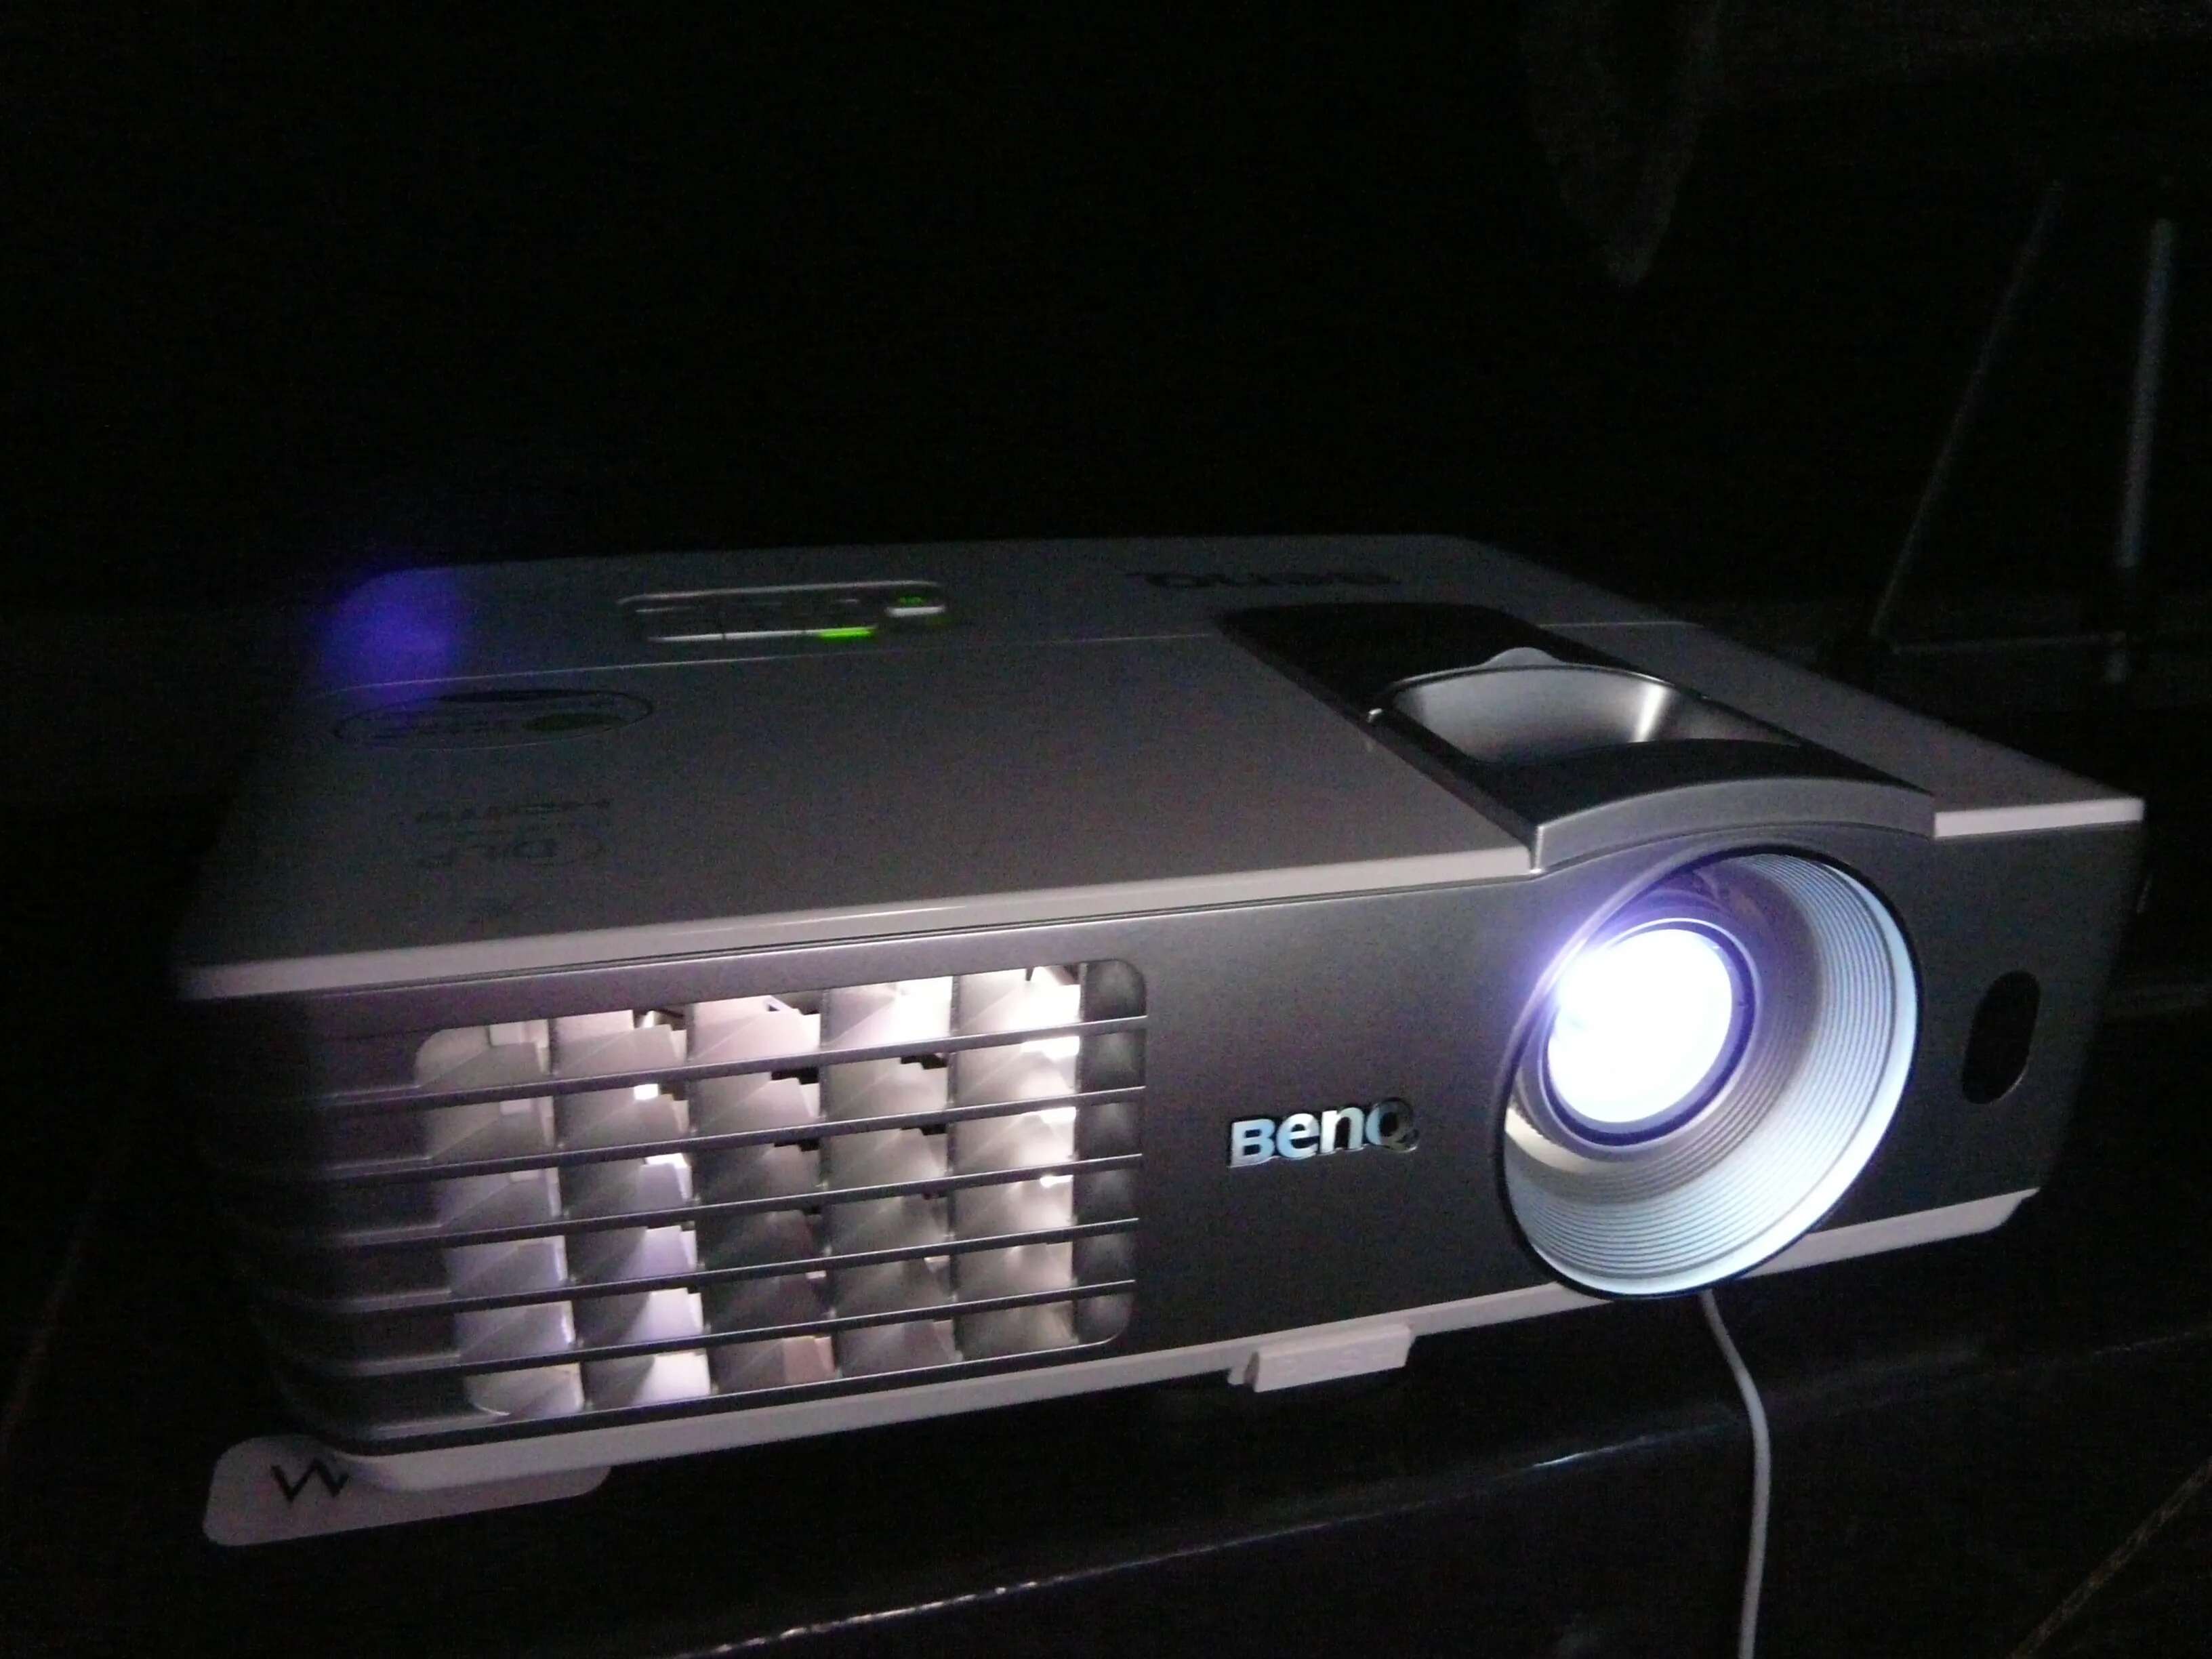 How To Connect Laptop To Benq Projector